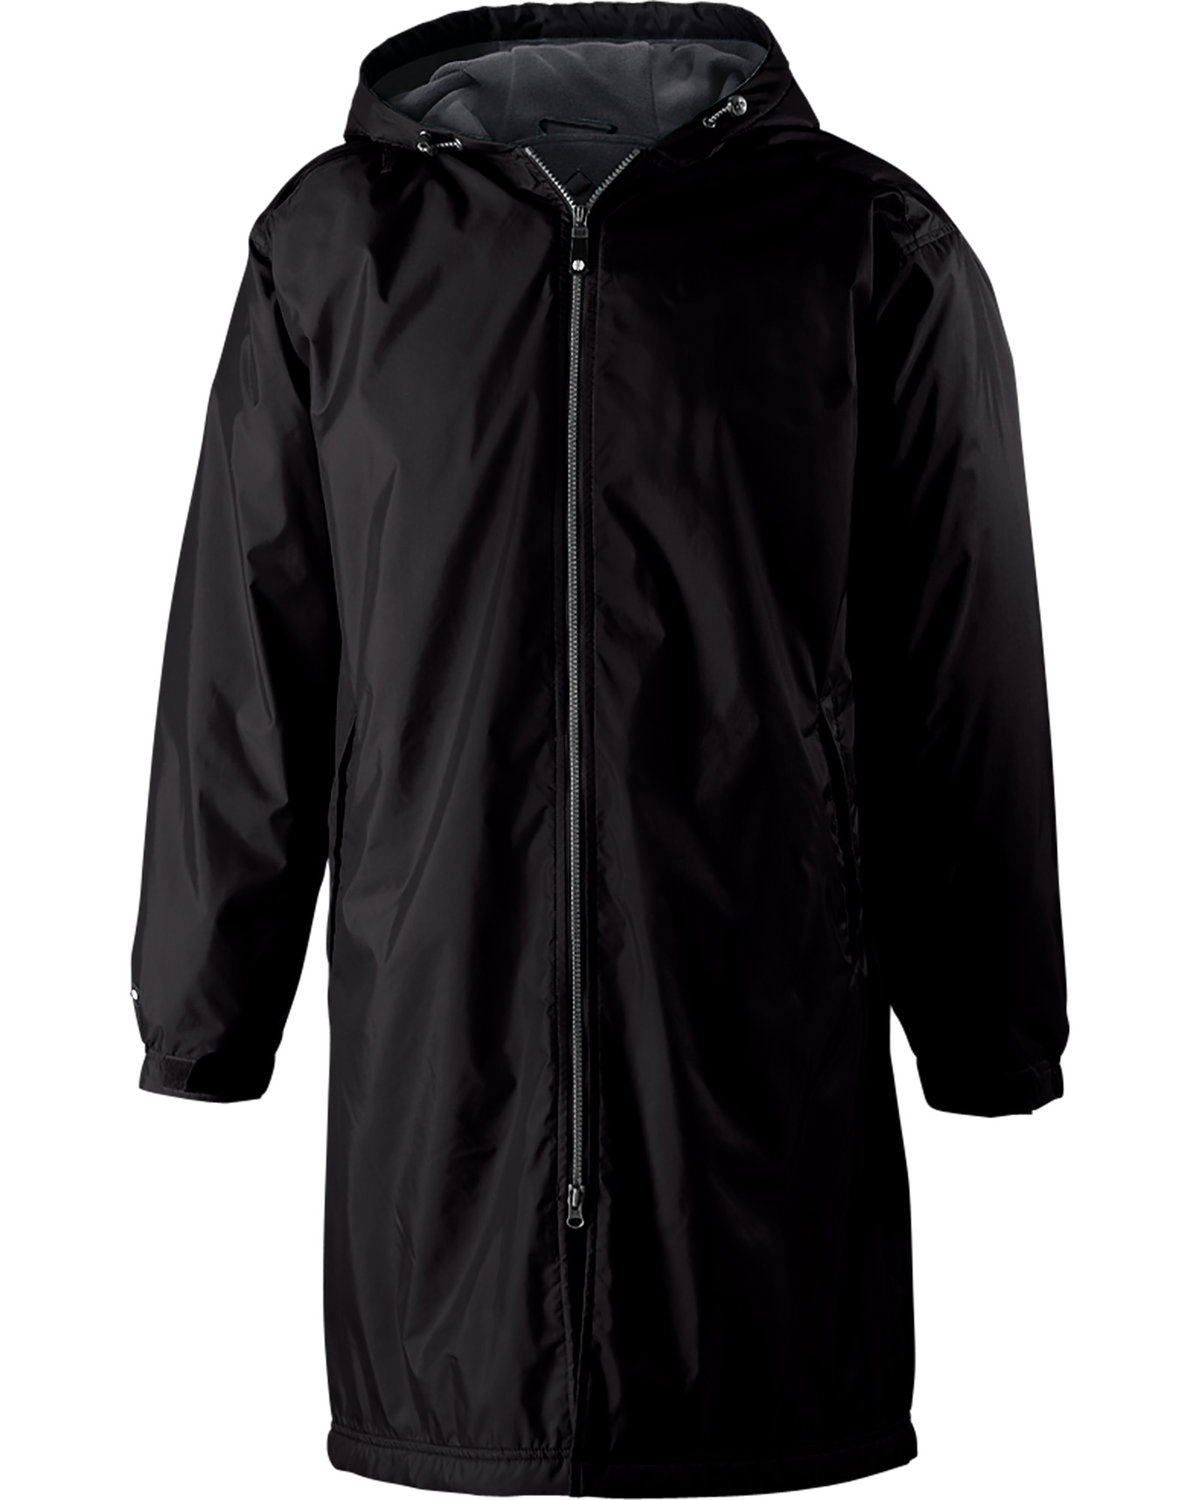 Adult Polyester Full Zip Conquest Jacket-Holloway